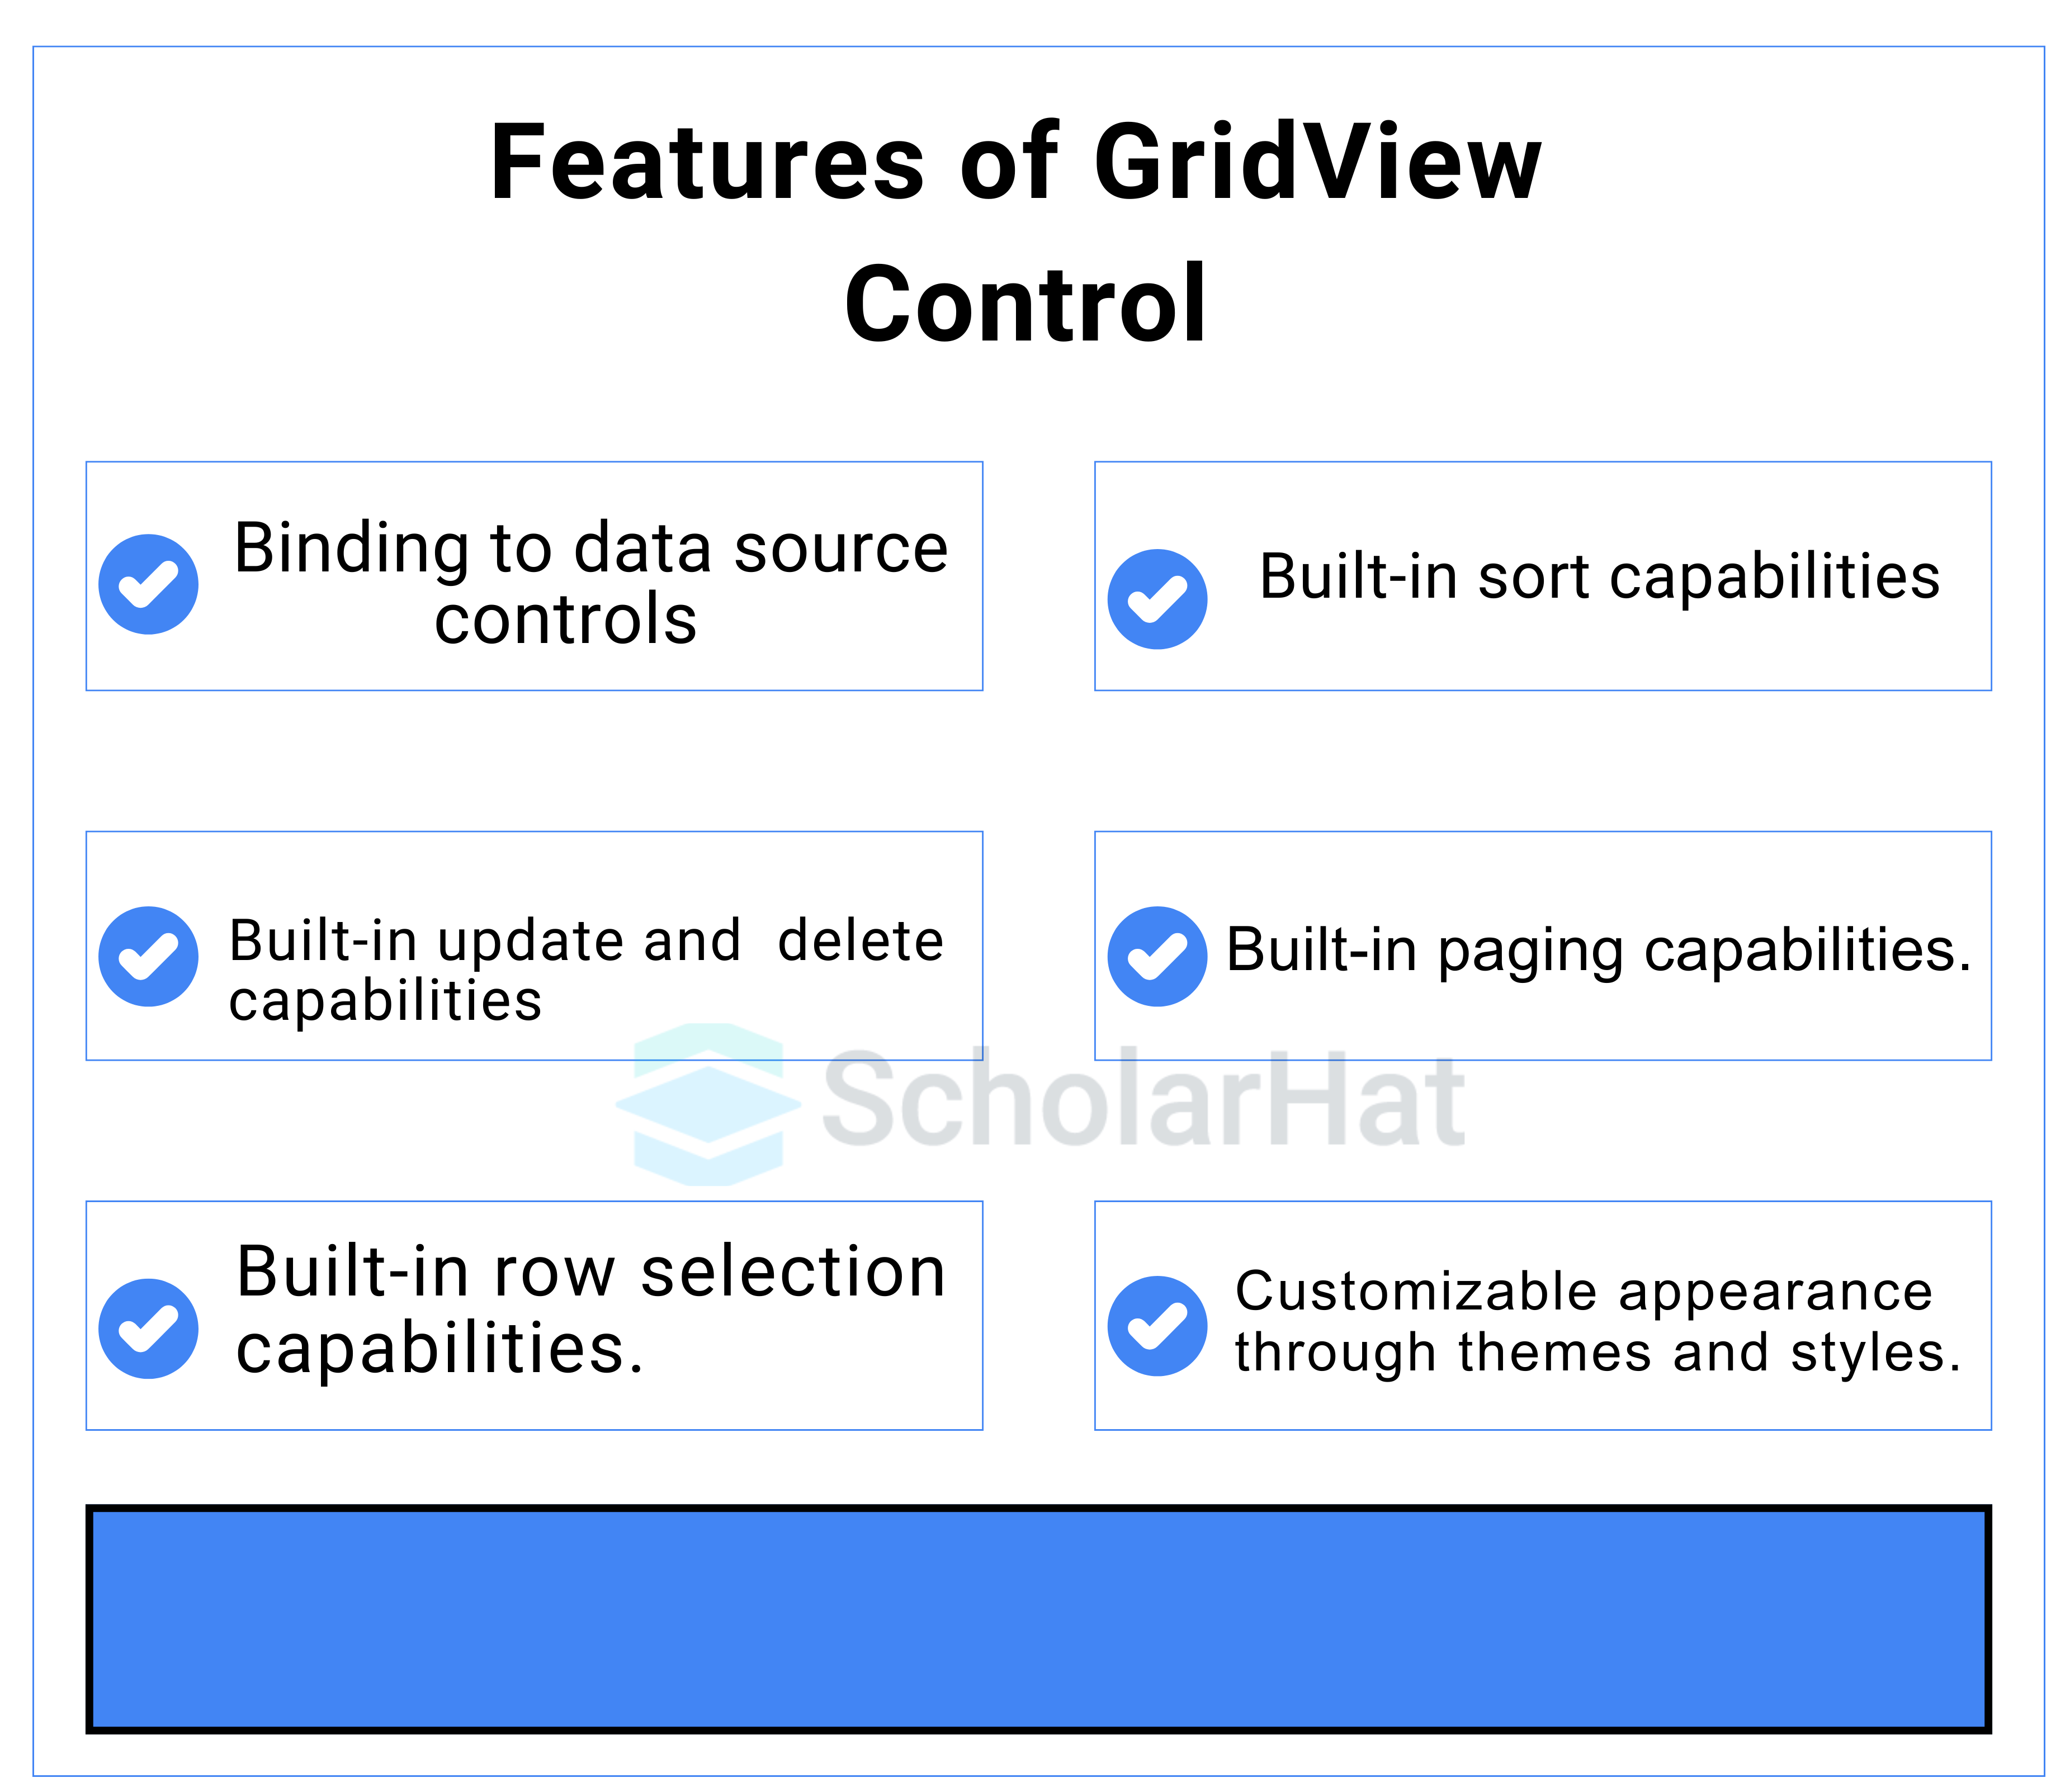 Feature of GridView Control